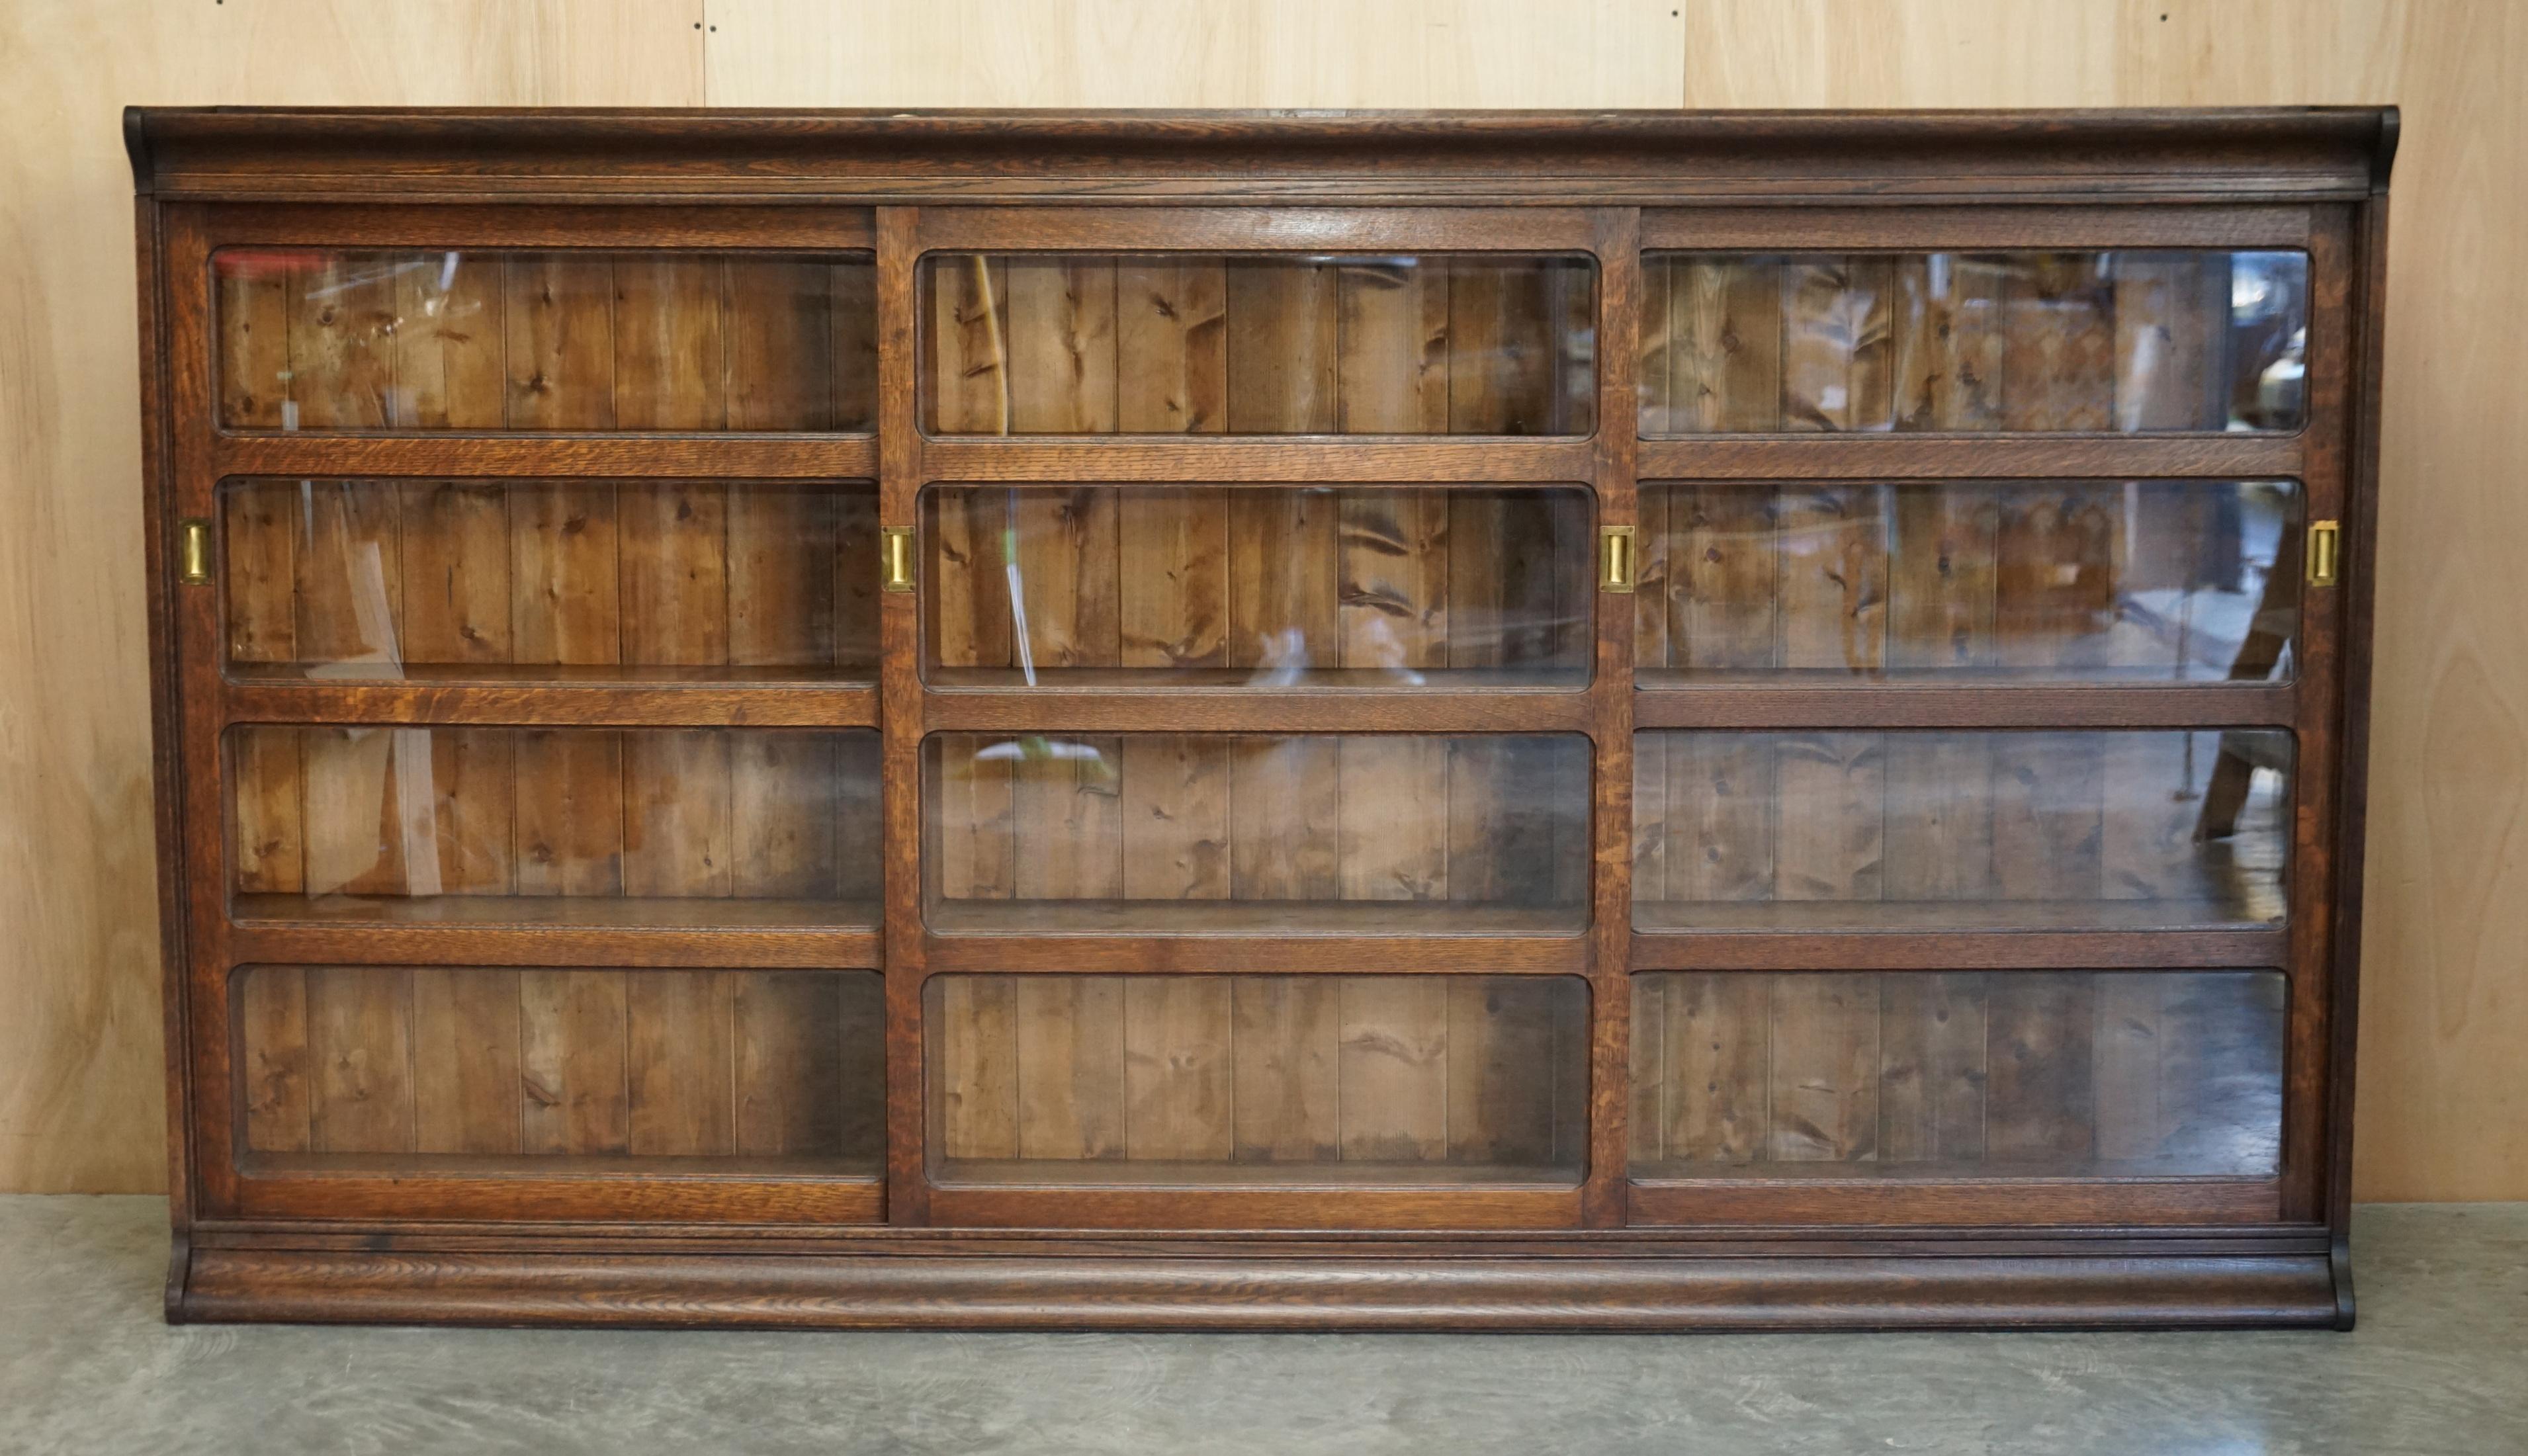 We are delighted to offer for sale this stunning original mid-Victorian Apothecary or Haberdashery cabinet library bookcase or sideboard

This is a very good looking and well made piece. It is a good height and wonderful width, ideally suited for